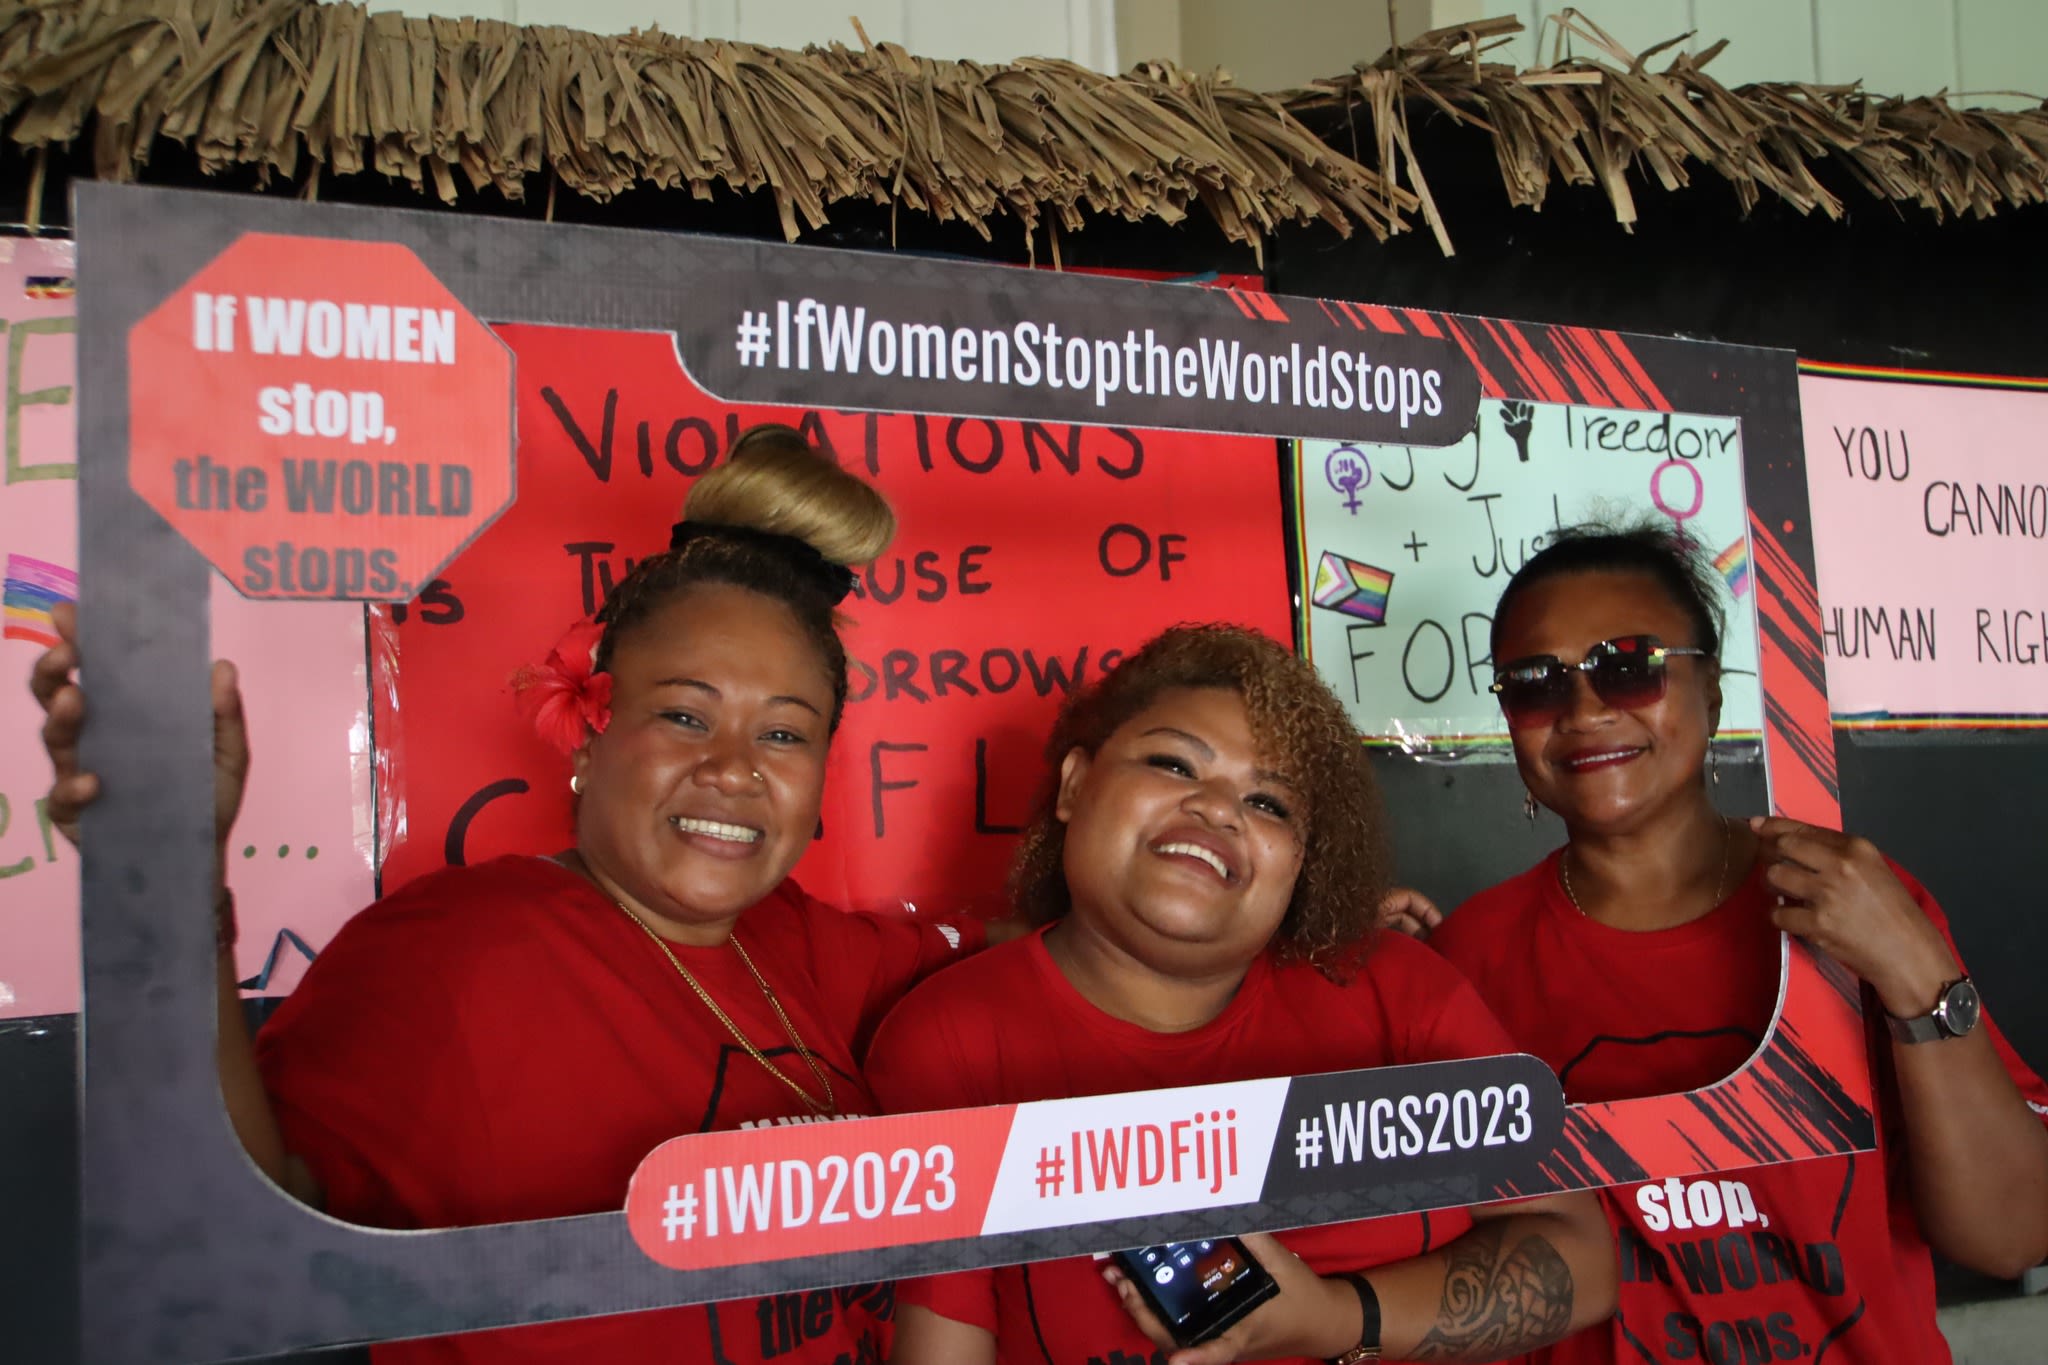 Three women dressed in red t-shirts smiling at the camera as they pose with a selfie frame that reads, 'If Women Stop, The World Stops - #IWD2023 #IWDFiji #WGS2023'. 